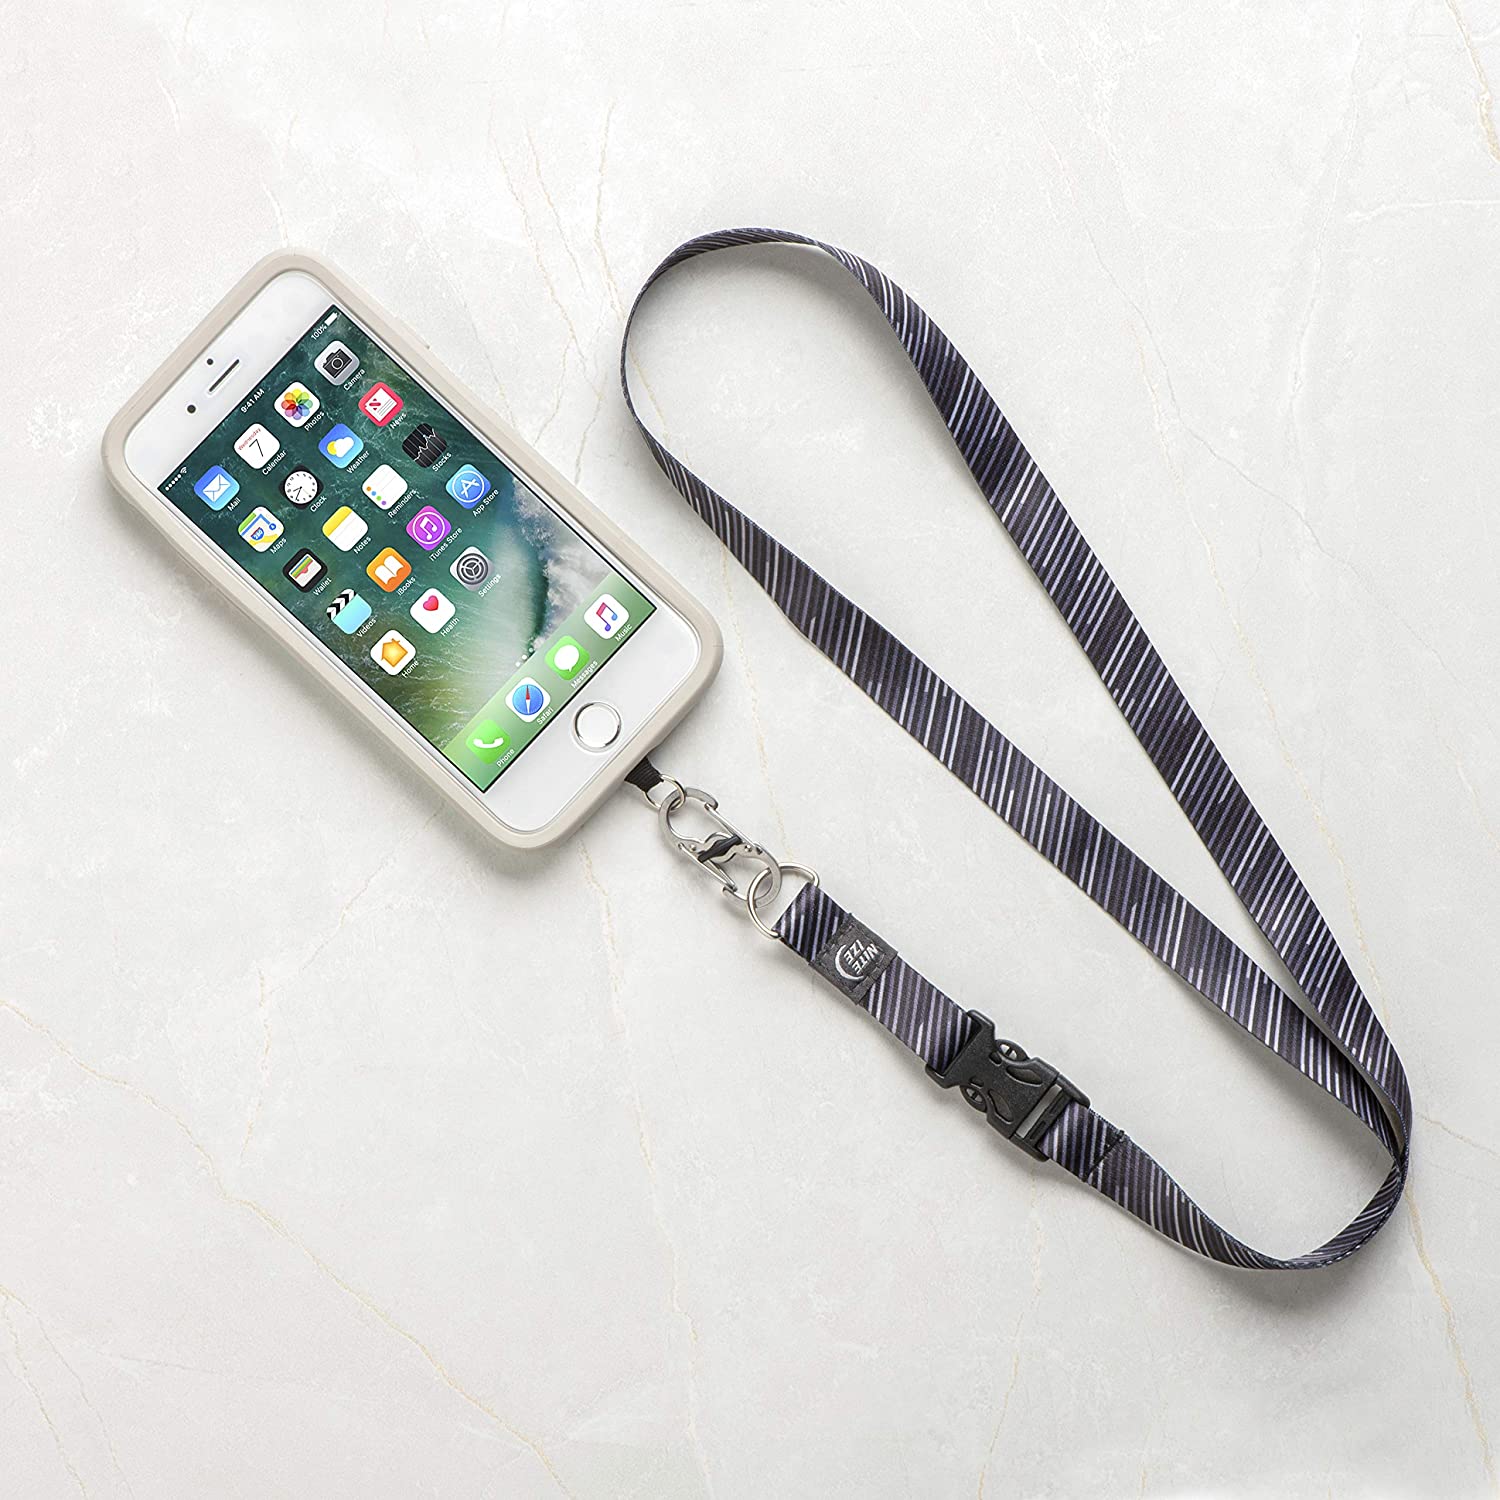 Nite Ize Hitch Phone Anchor with Lanyard for Drop Protection